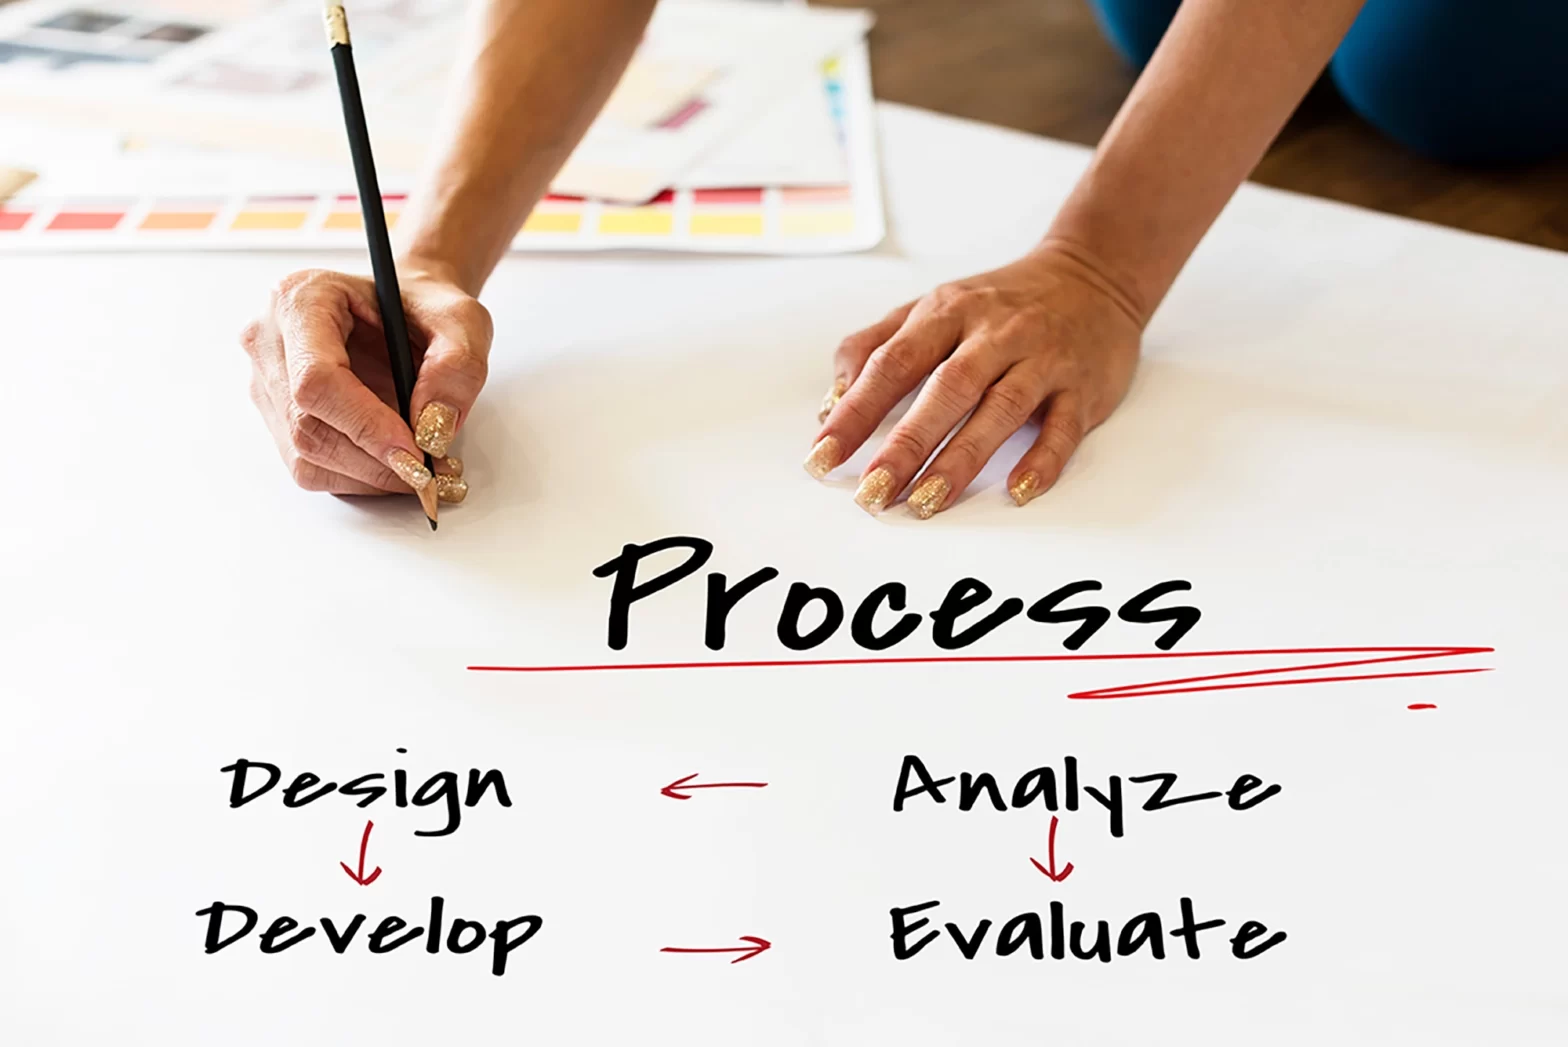 A UX Process Lifecycle, a step-by-step Guide